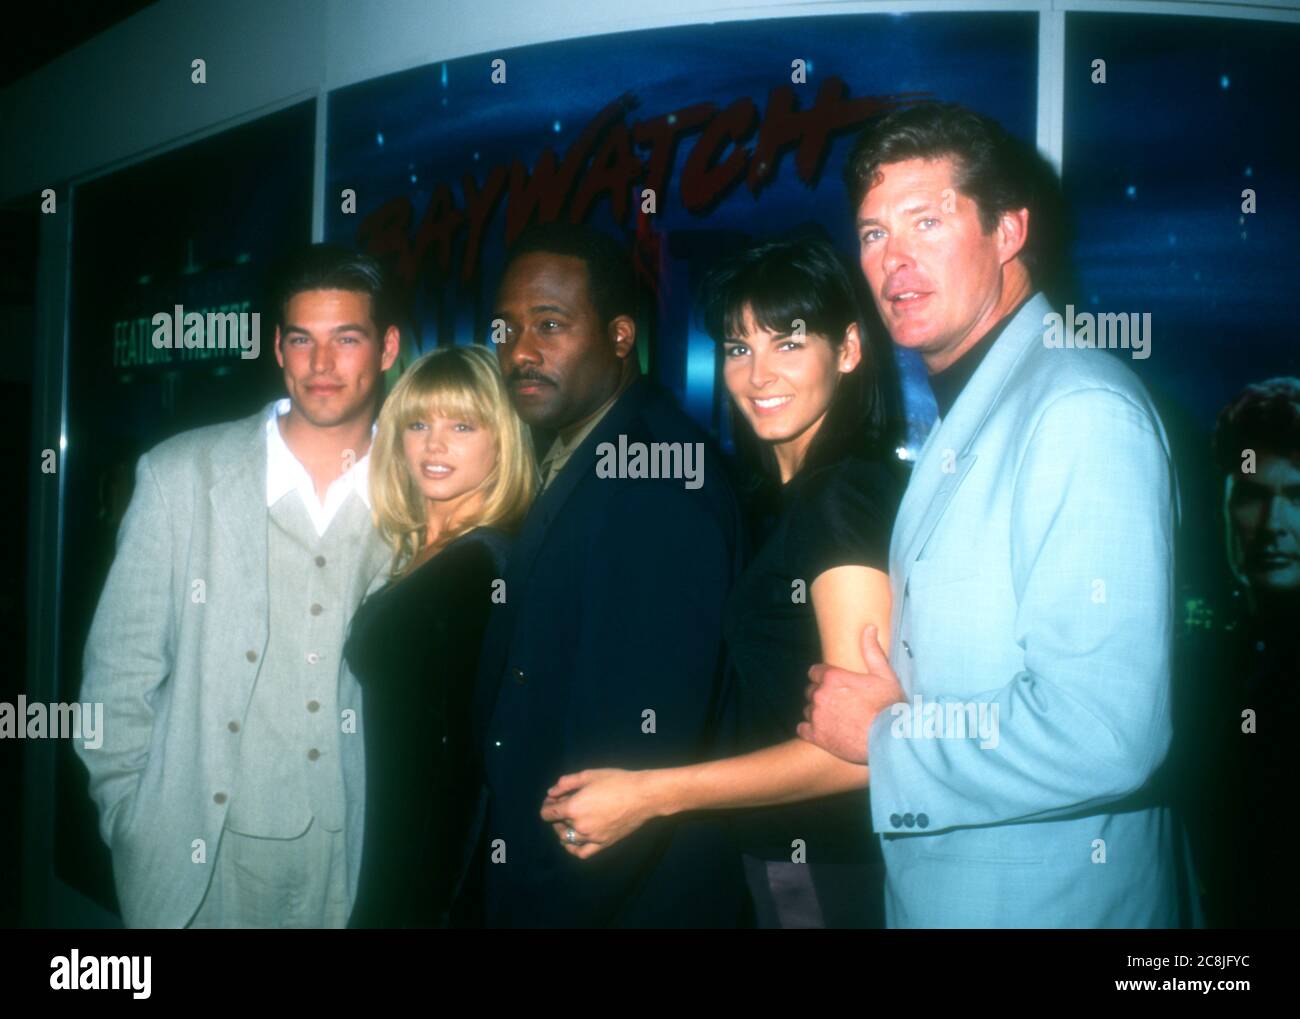 Las Vegas, Nevada, USA 23rd January 1996 Actor Eddie Cibrian, actress Donna D'Errico, actor Gregory Alan Williams, actress Angie Harmon and actor David Hasselhoff attend VSDA Convention on January 23, 1996 as Las Vegas Convention Center in Las Vegas, Nevada, USA. Photo by Barry King/Alamy Stock Photo Stock Photo